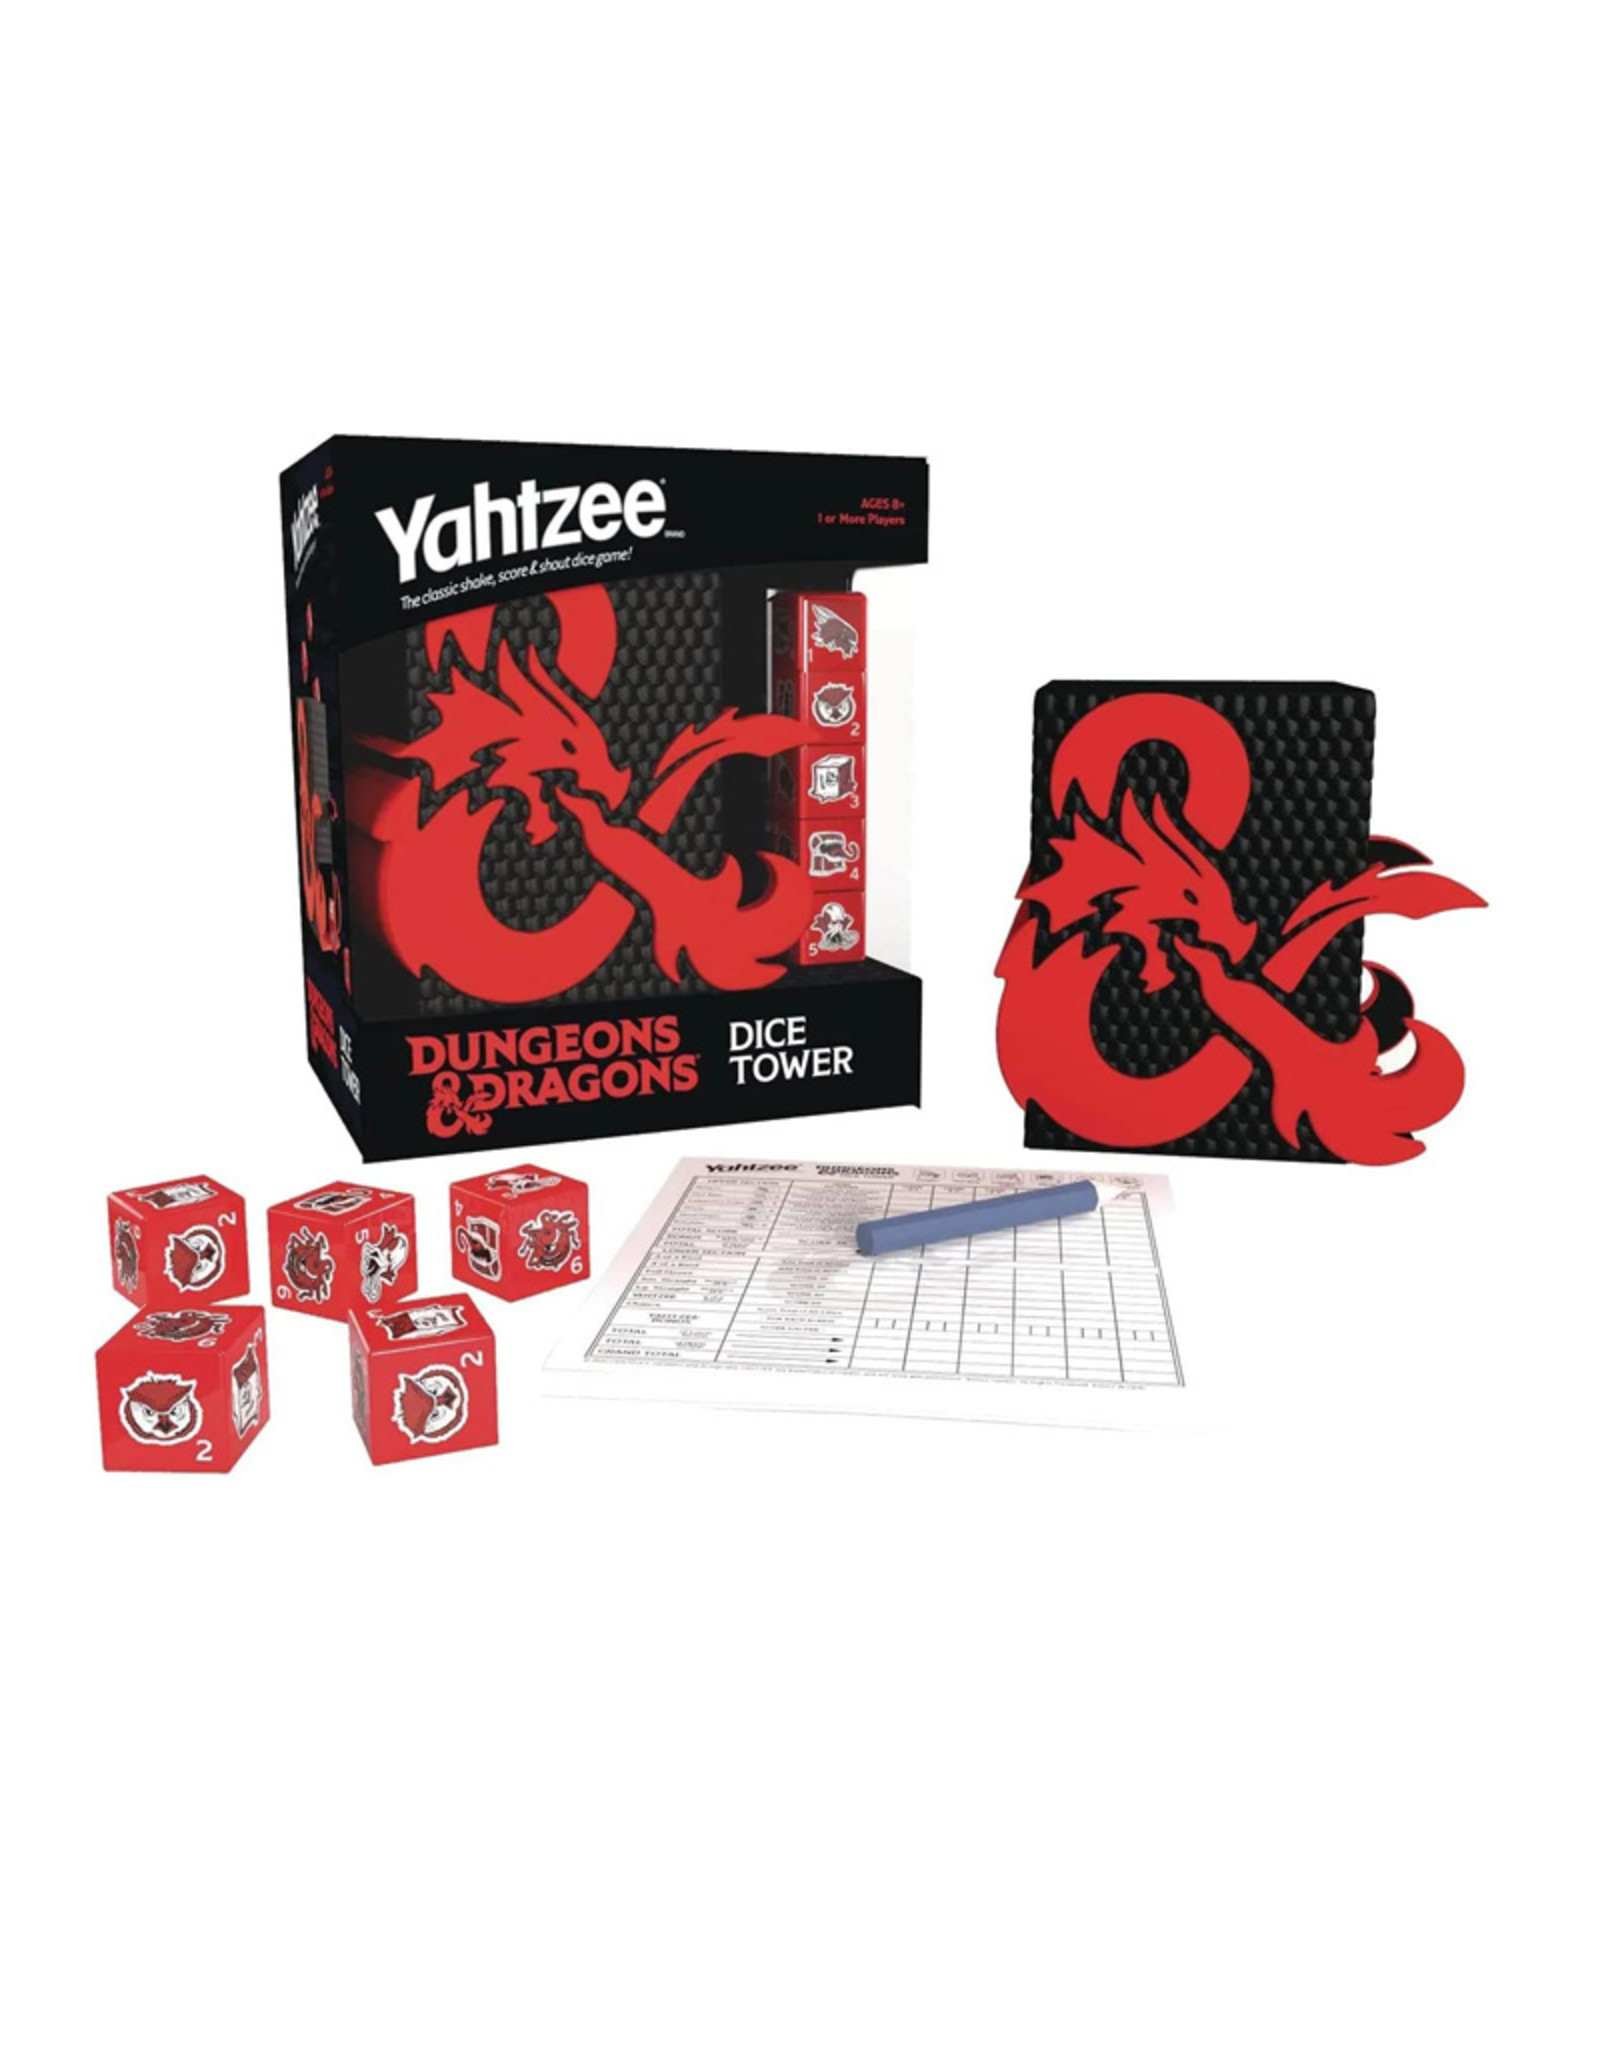 Usaopoly Yahtzee Dungeons & Dragons Dice